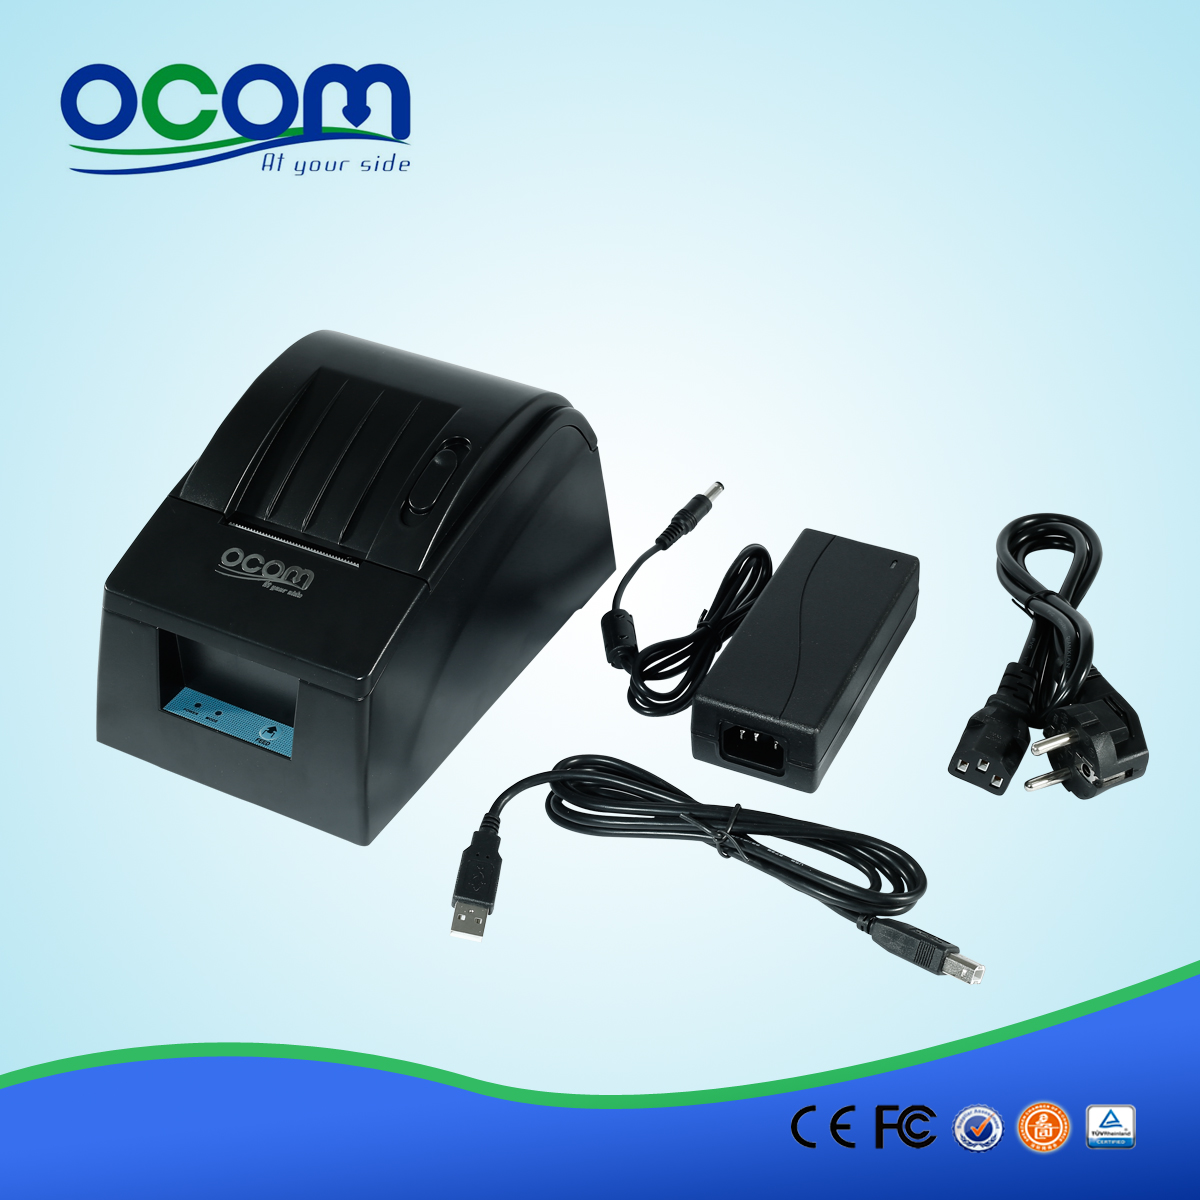 Best price 58mm receipt thermal printer with USB RS232 Parallel LAN optional ports